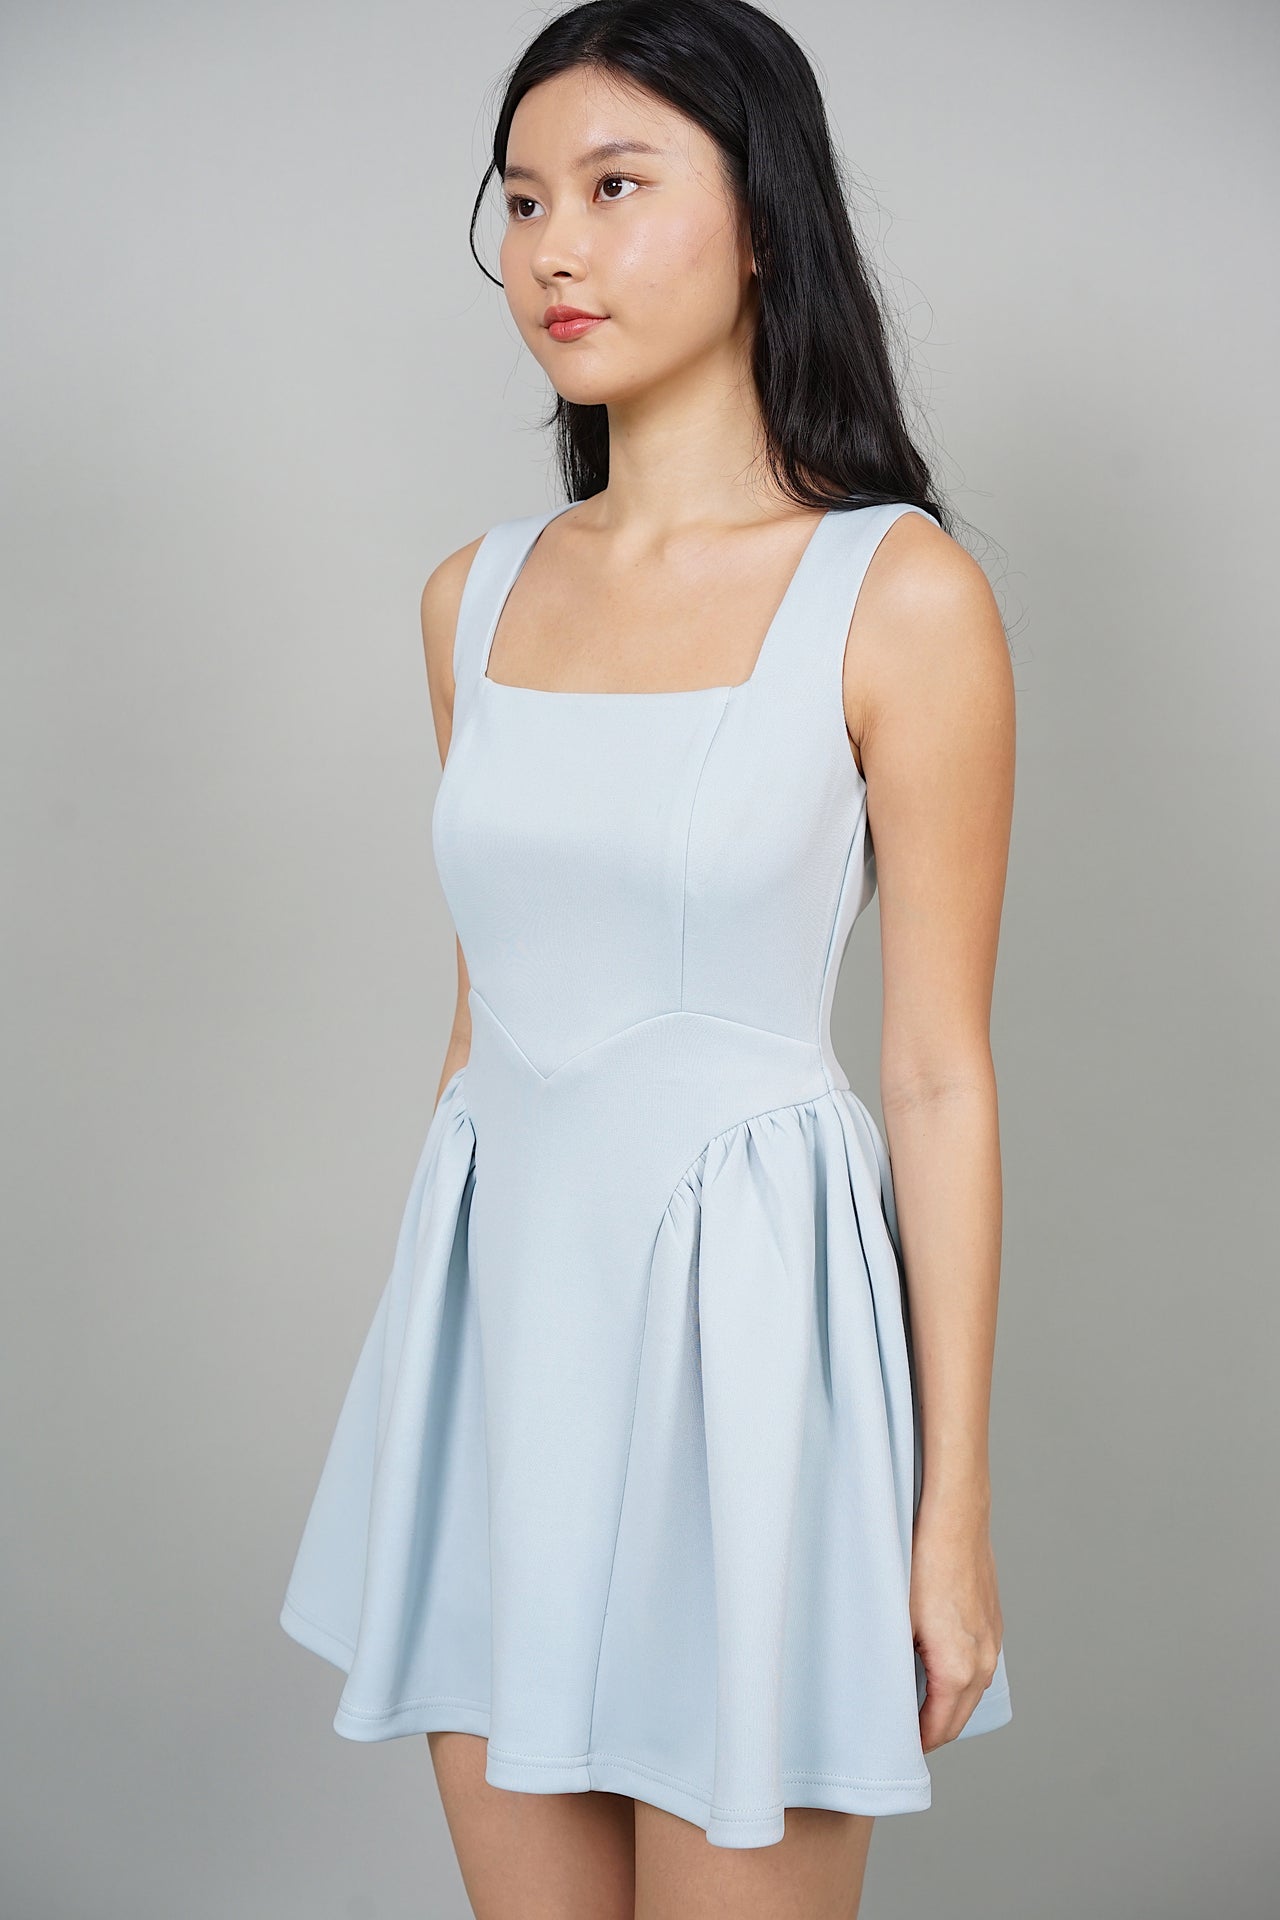 Ophelia Puffy Romper in Baby Blue